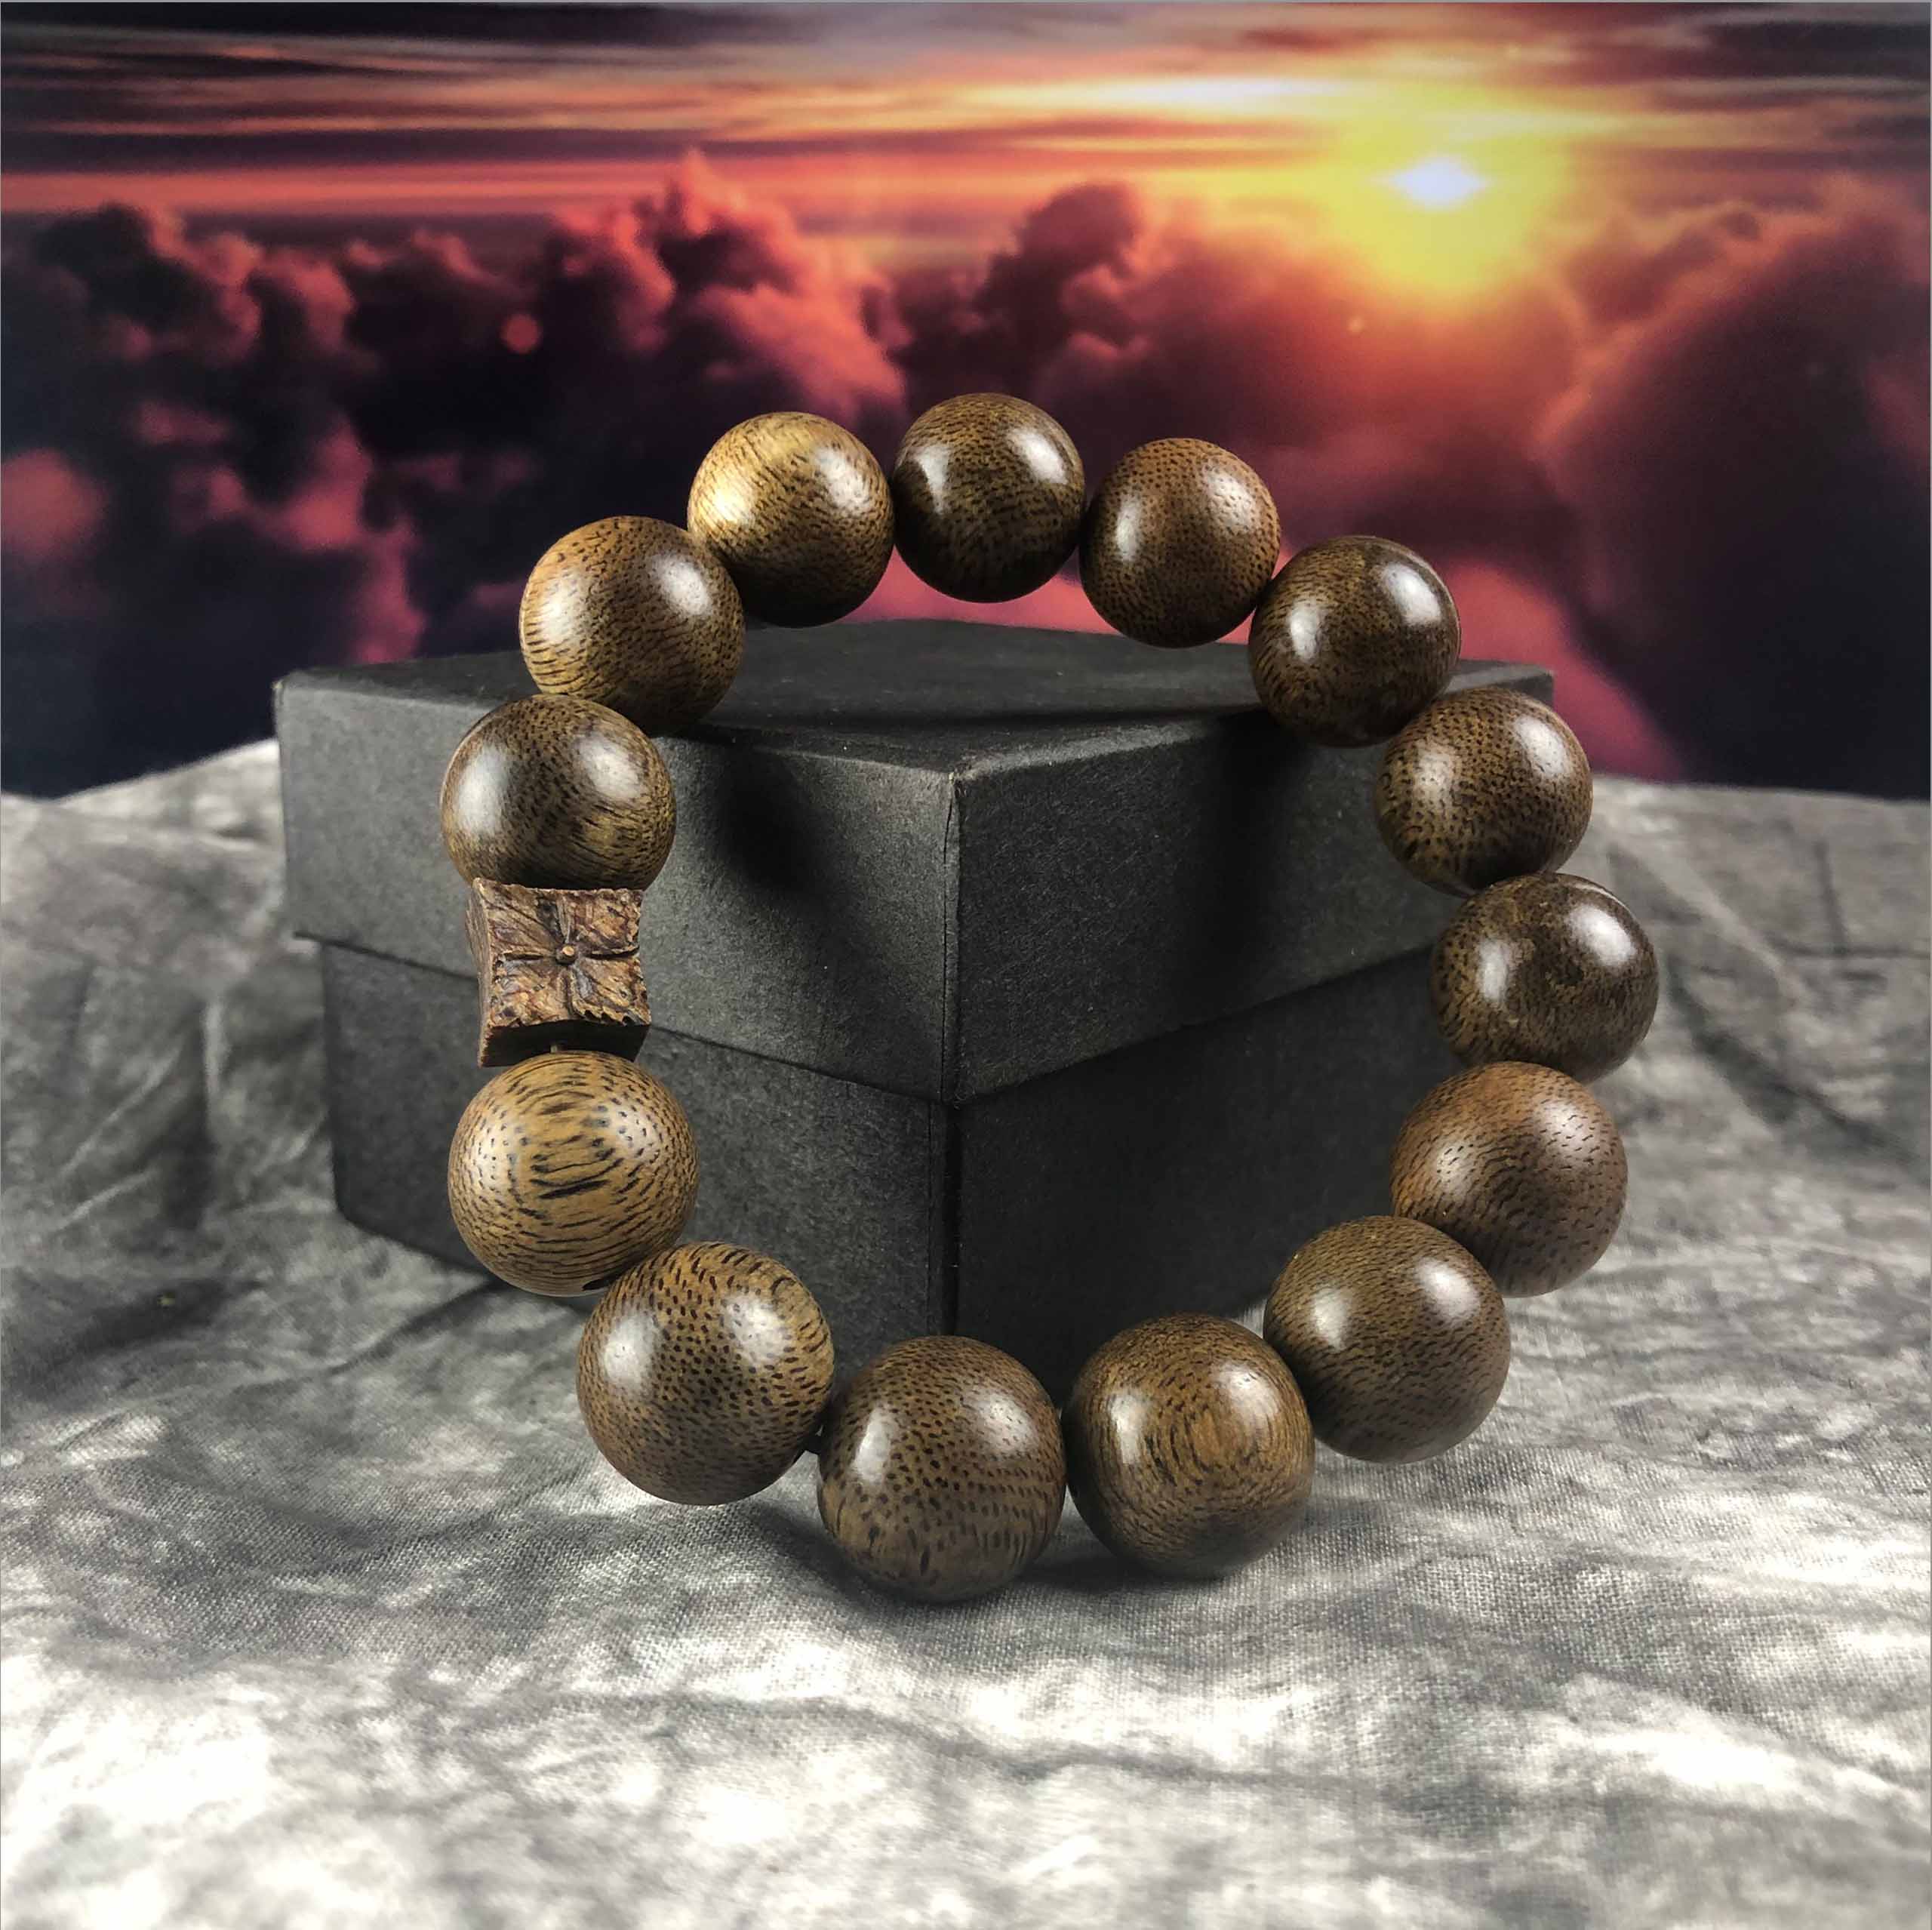 Agarwood bracelet 16 cups 14 round beads with a touch of flowers - VT92LHFA